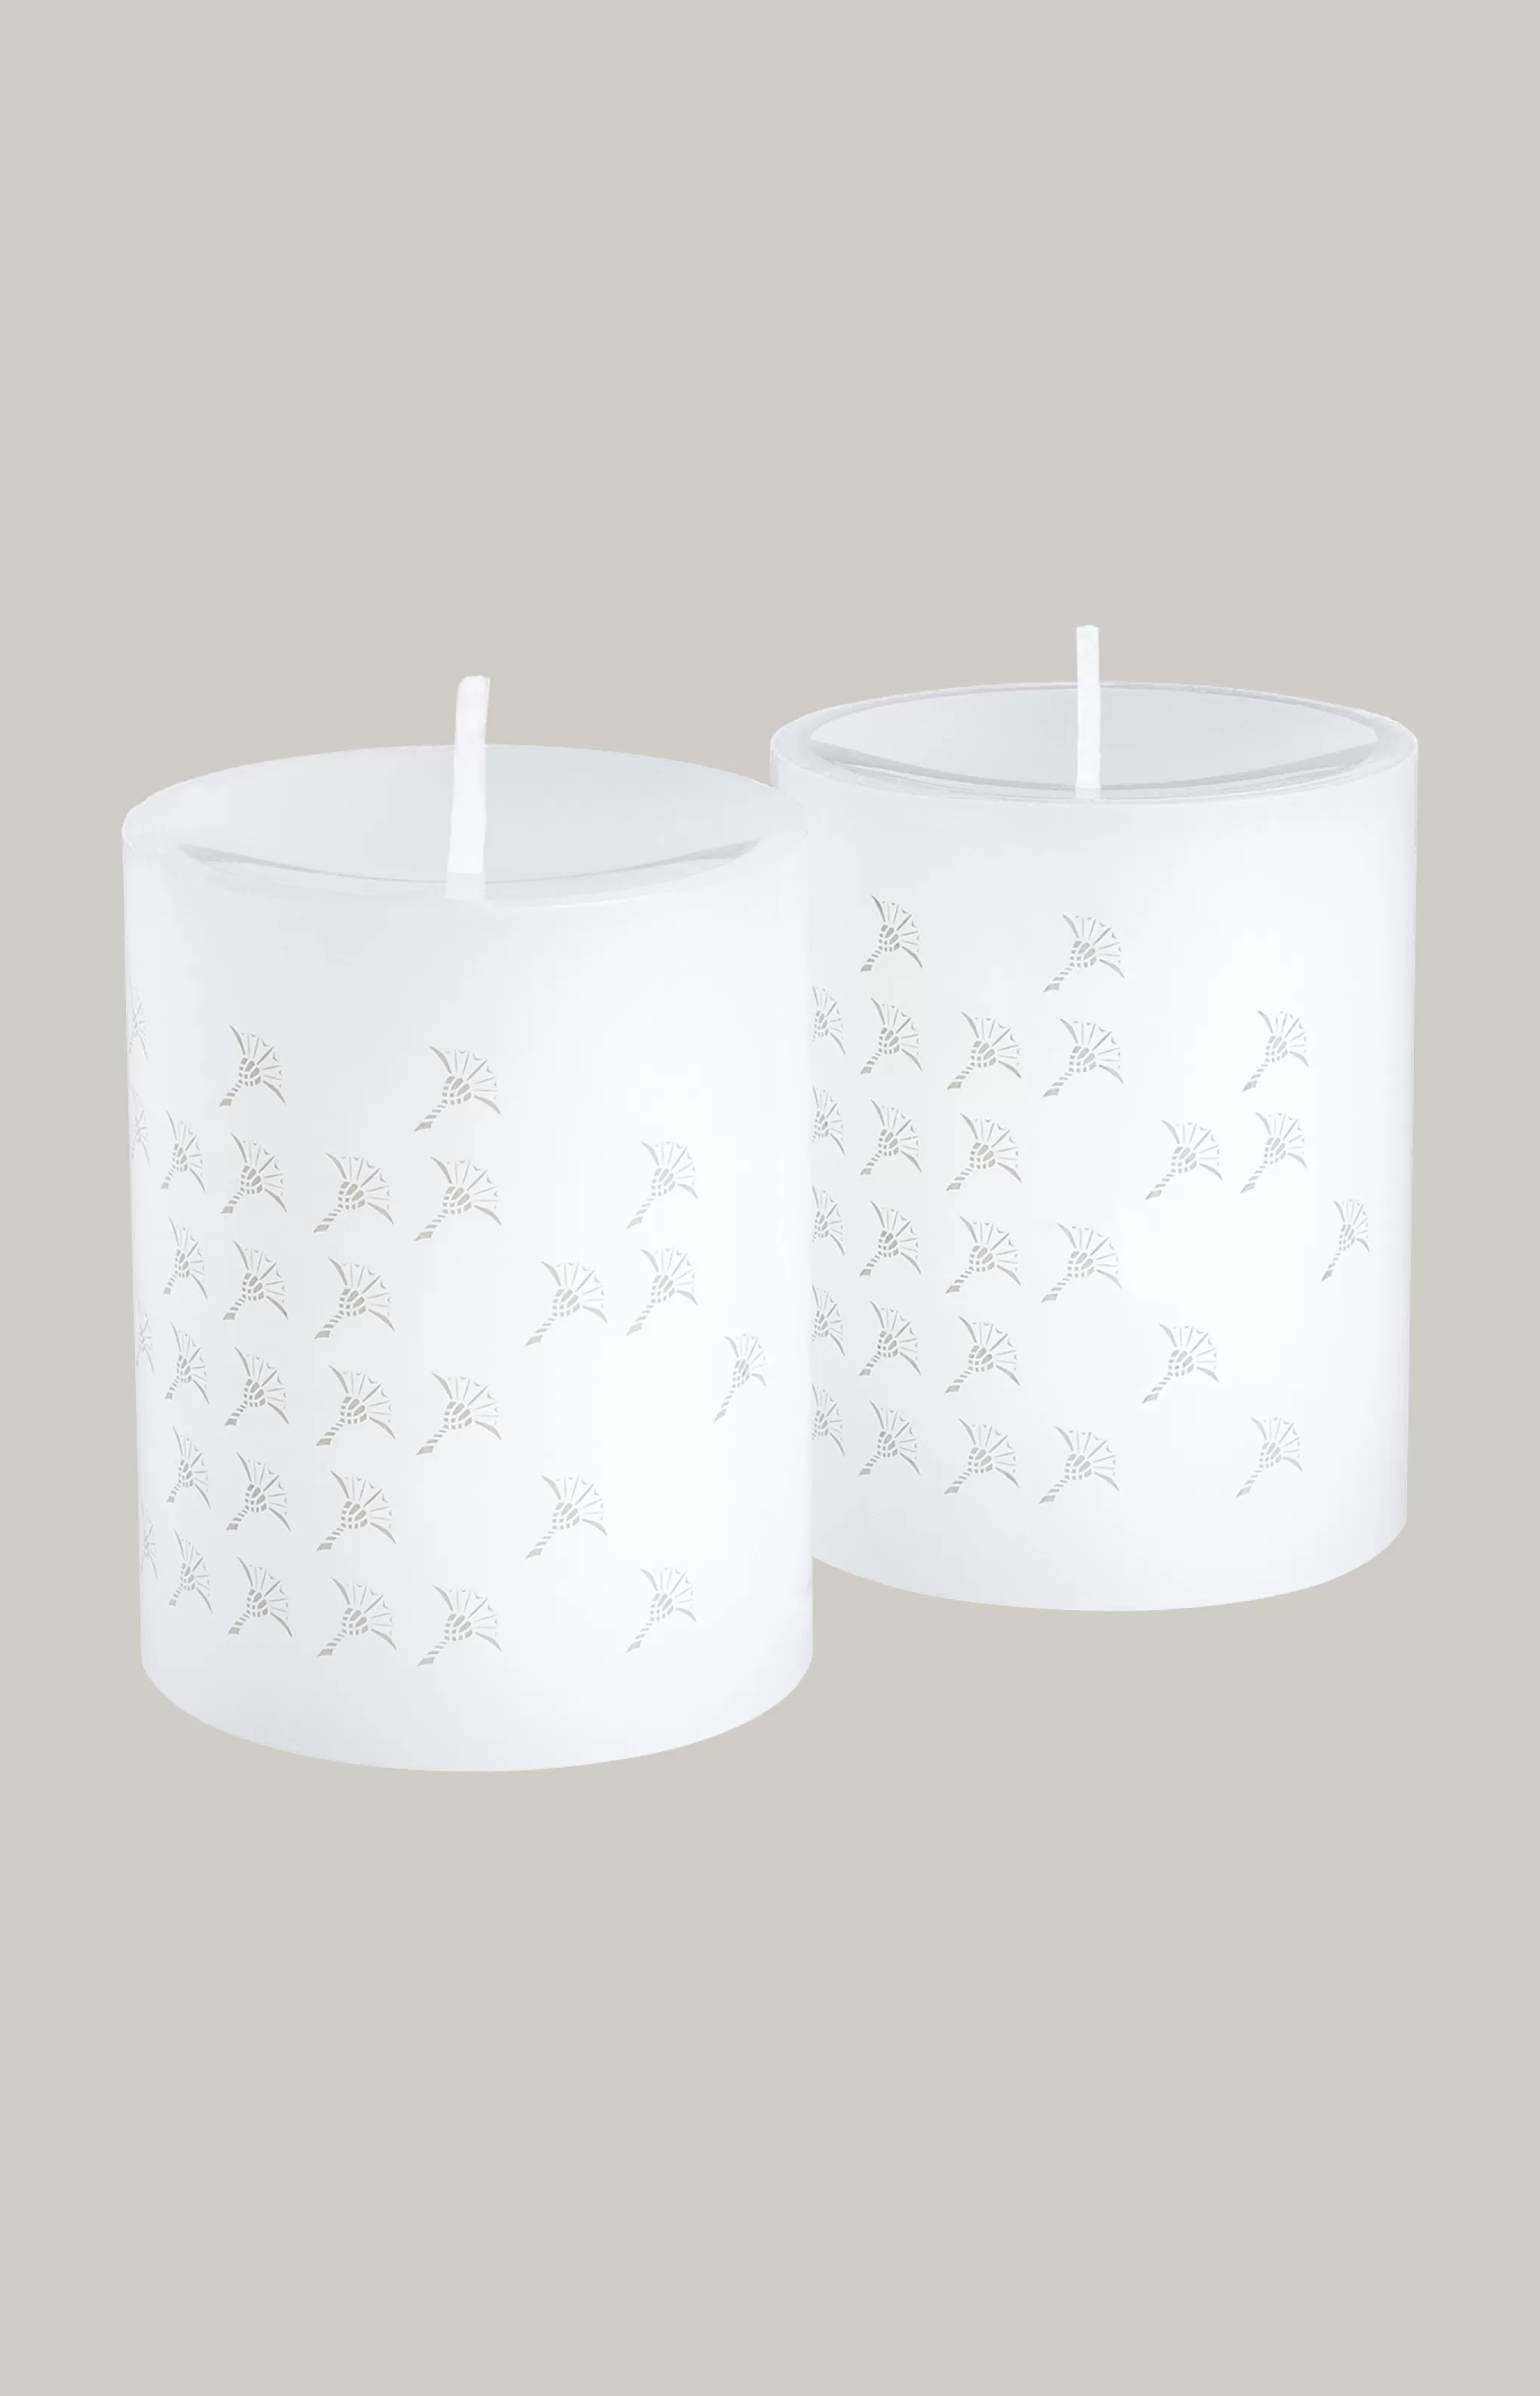 Home Accessories | Discover Everything | Candles & Candleholders | Table Accessories*JOOP Home Accessories | Discover Everything | Candles & Candleholders | Table Accessories ! FADED CORNFLOWER Pillar Candles in - Set of 2, 10 cm tall